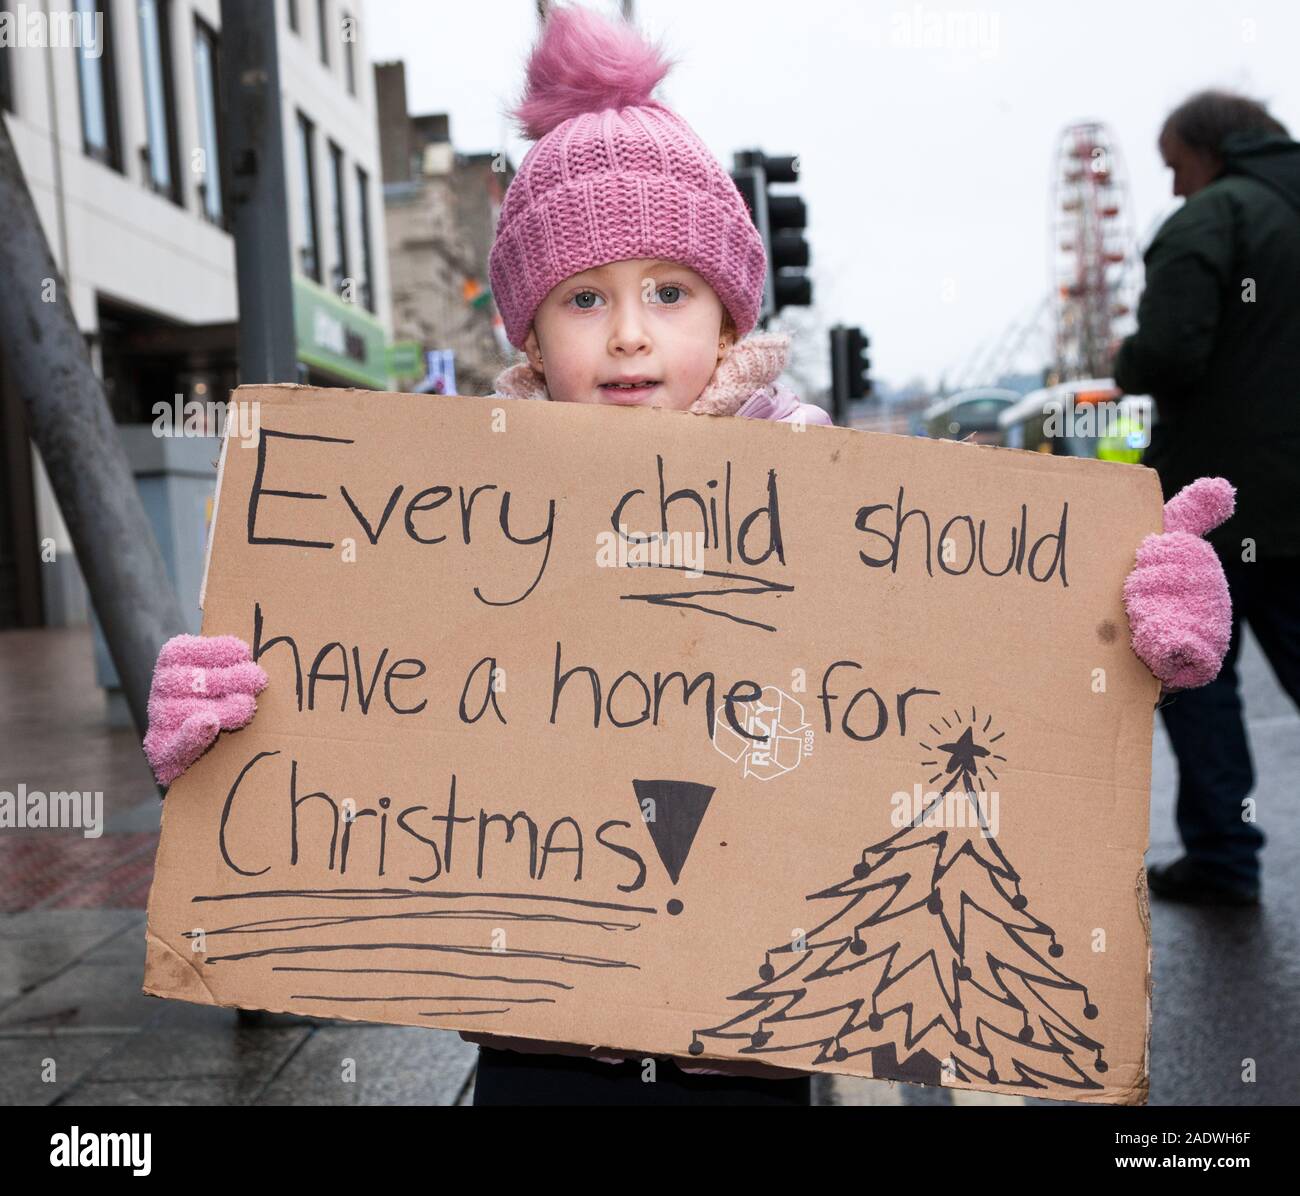 Cork City, Cork, Ireland. 05th December, 2019.  Jadya O'Flynn, Ballincollig at the housing protest march organised by the Right2Housing group which was held in Cork and highlightsthe issue of the housing crisis and homelessness in Cork City, Ireland. - Credit; David Creedon / Alamy Live News Stock Photo